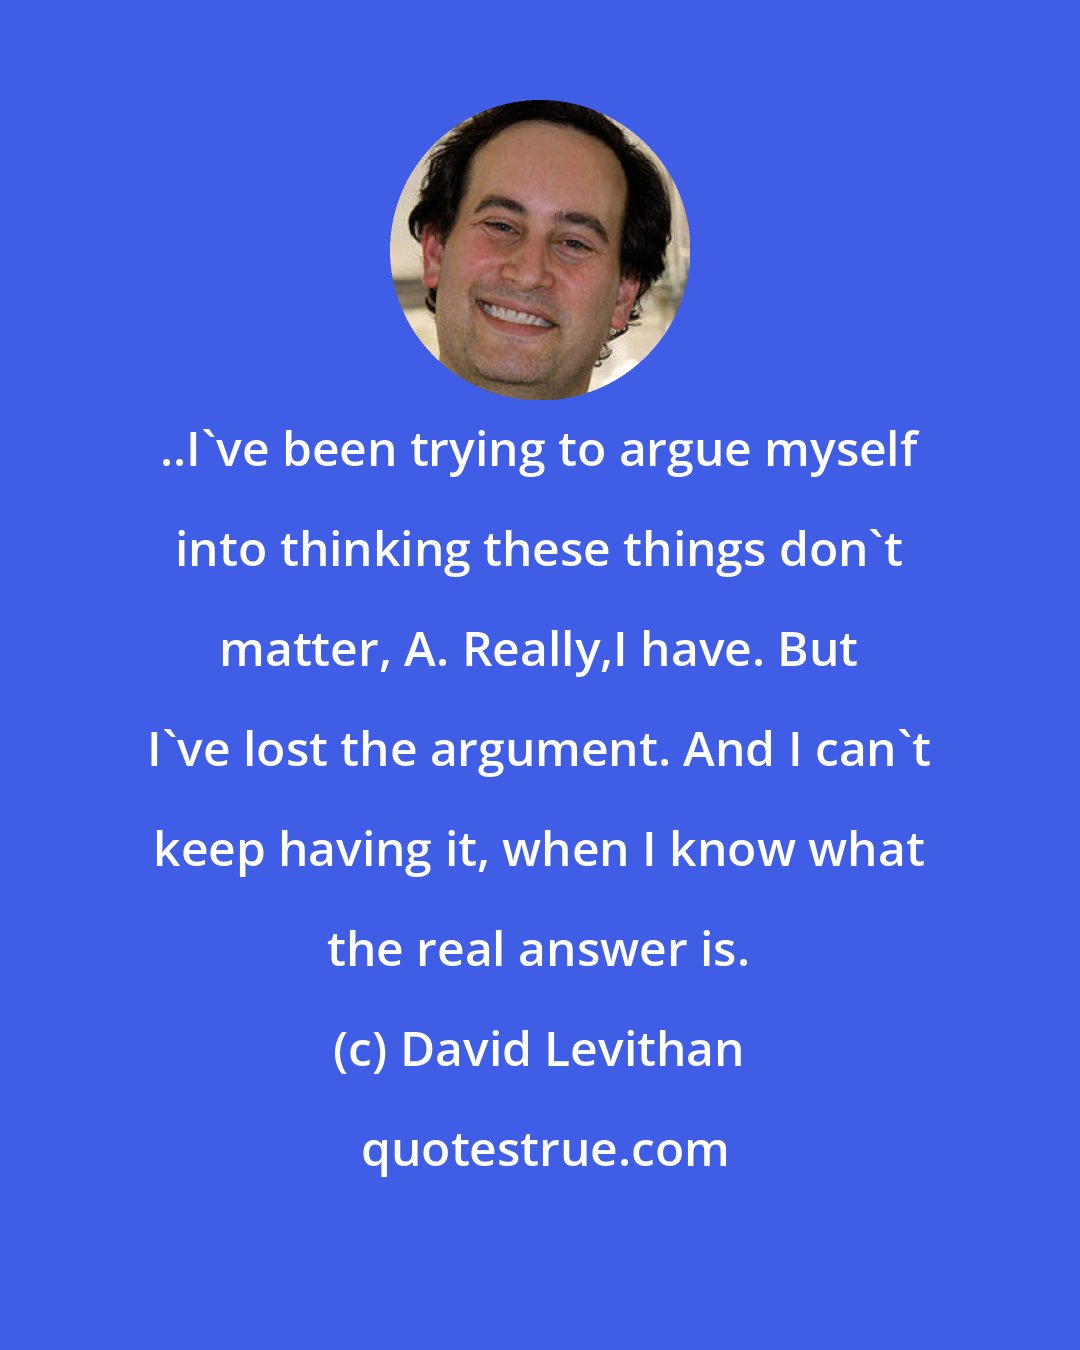 David Levithan: ..I've been trying to argue myself into thinking these things don't matter, A. Really,I have. But I've lost the argument. And I can't keep having it, when I know what the real answer is.